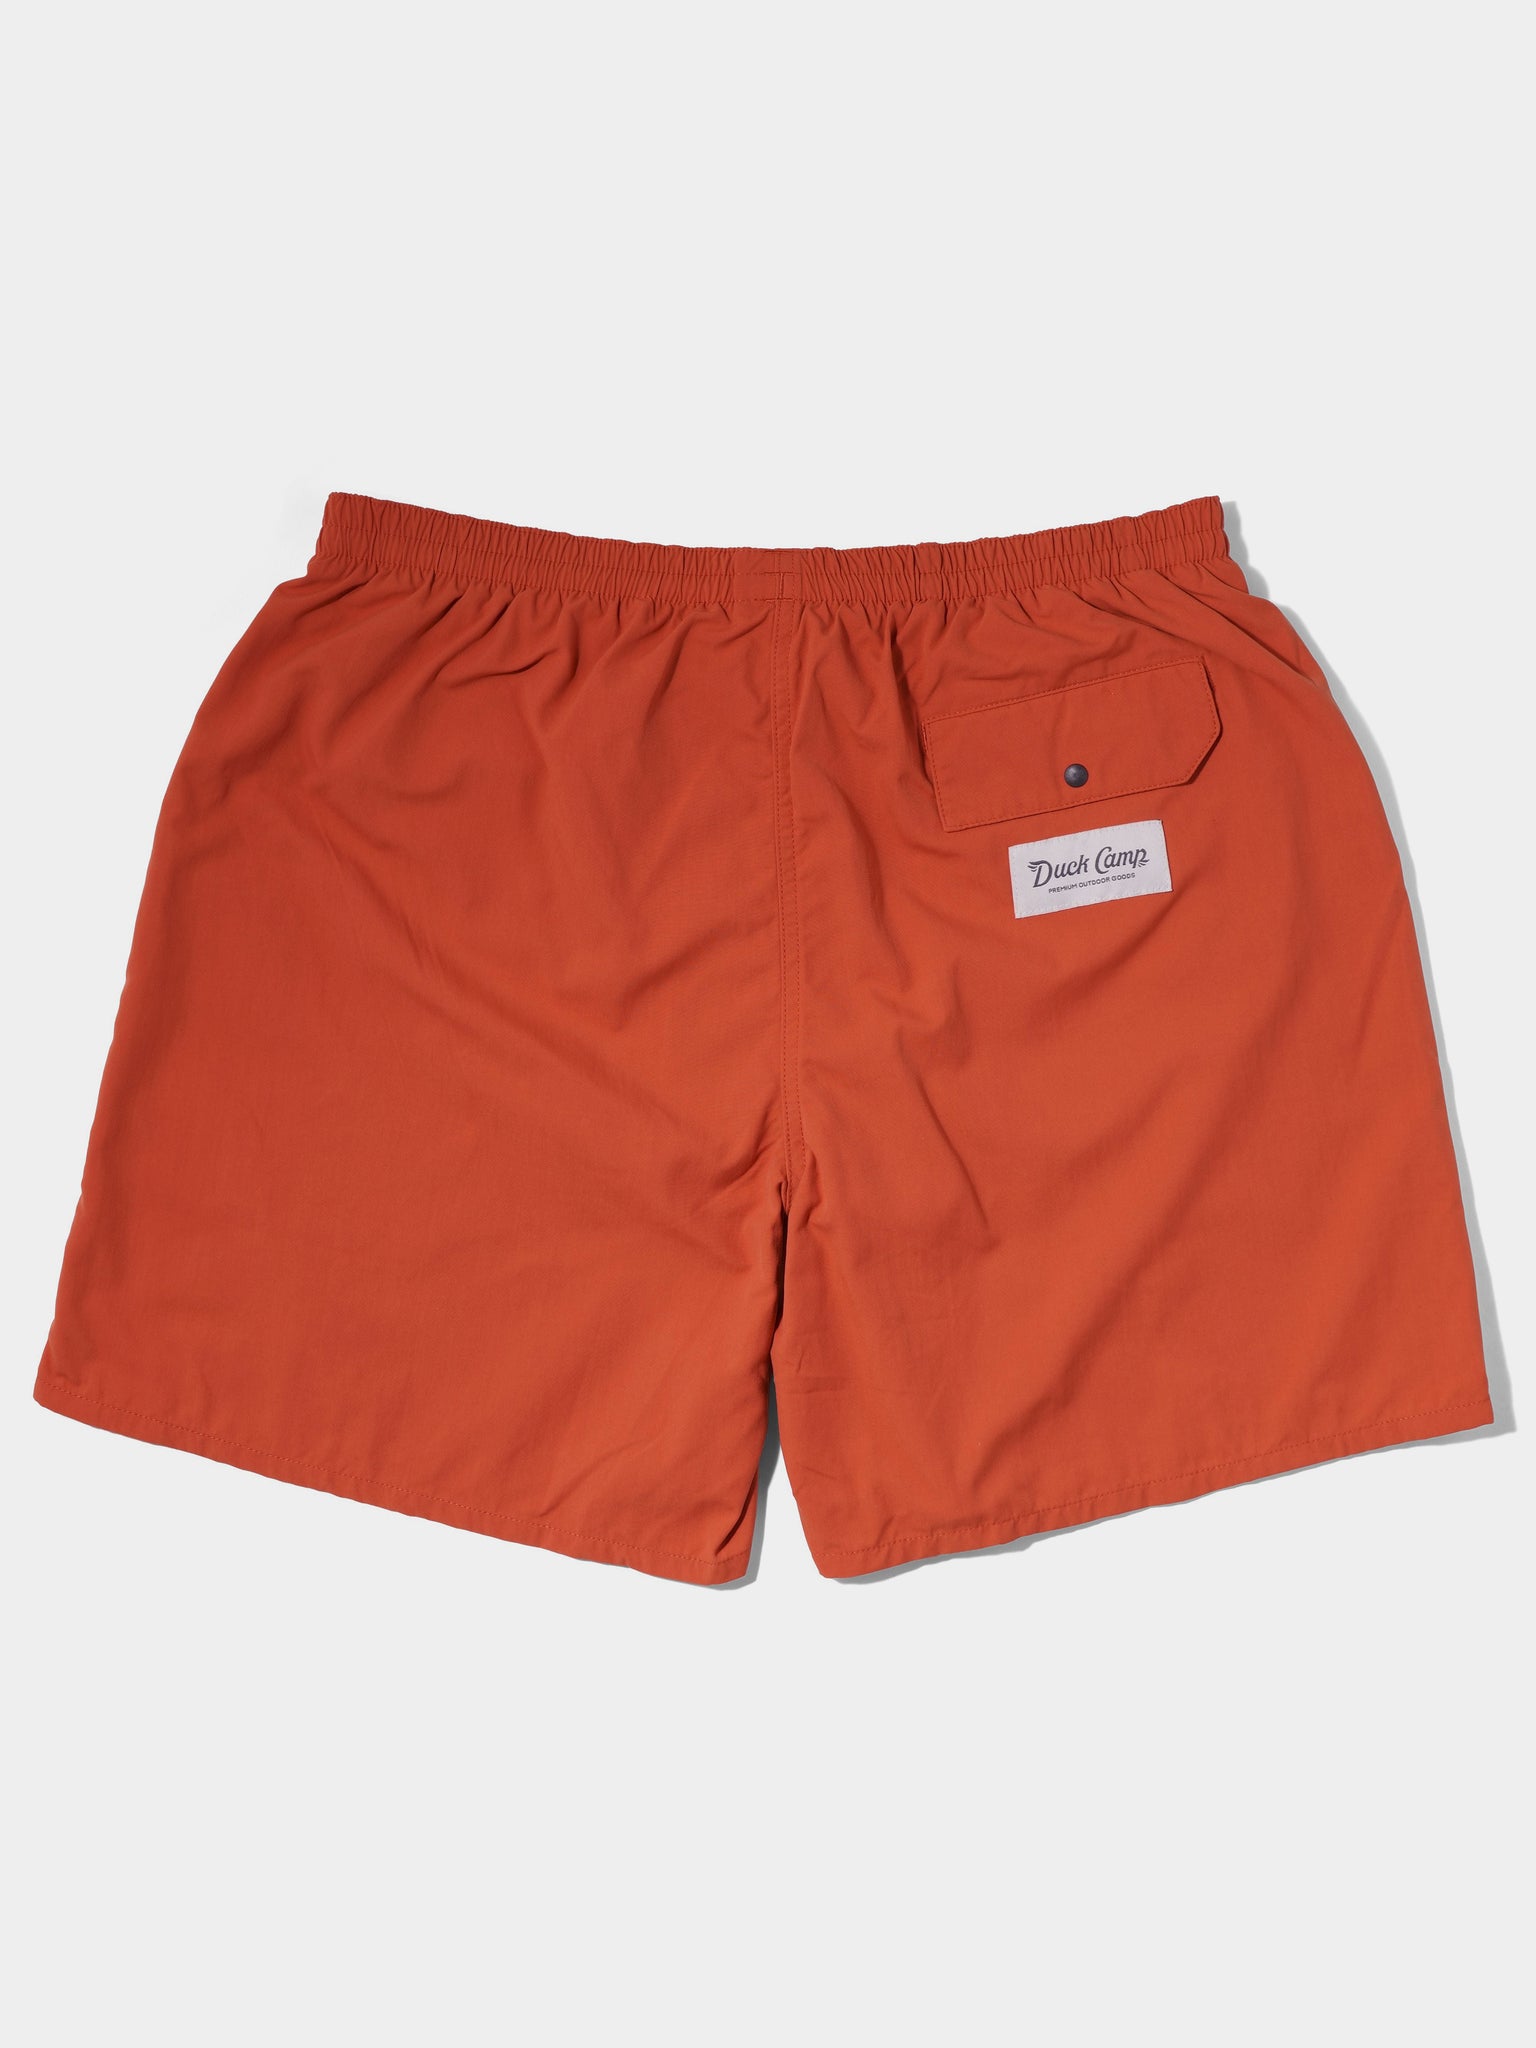 Scout Shorts 7" - Cinnamon Teal